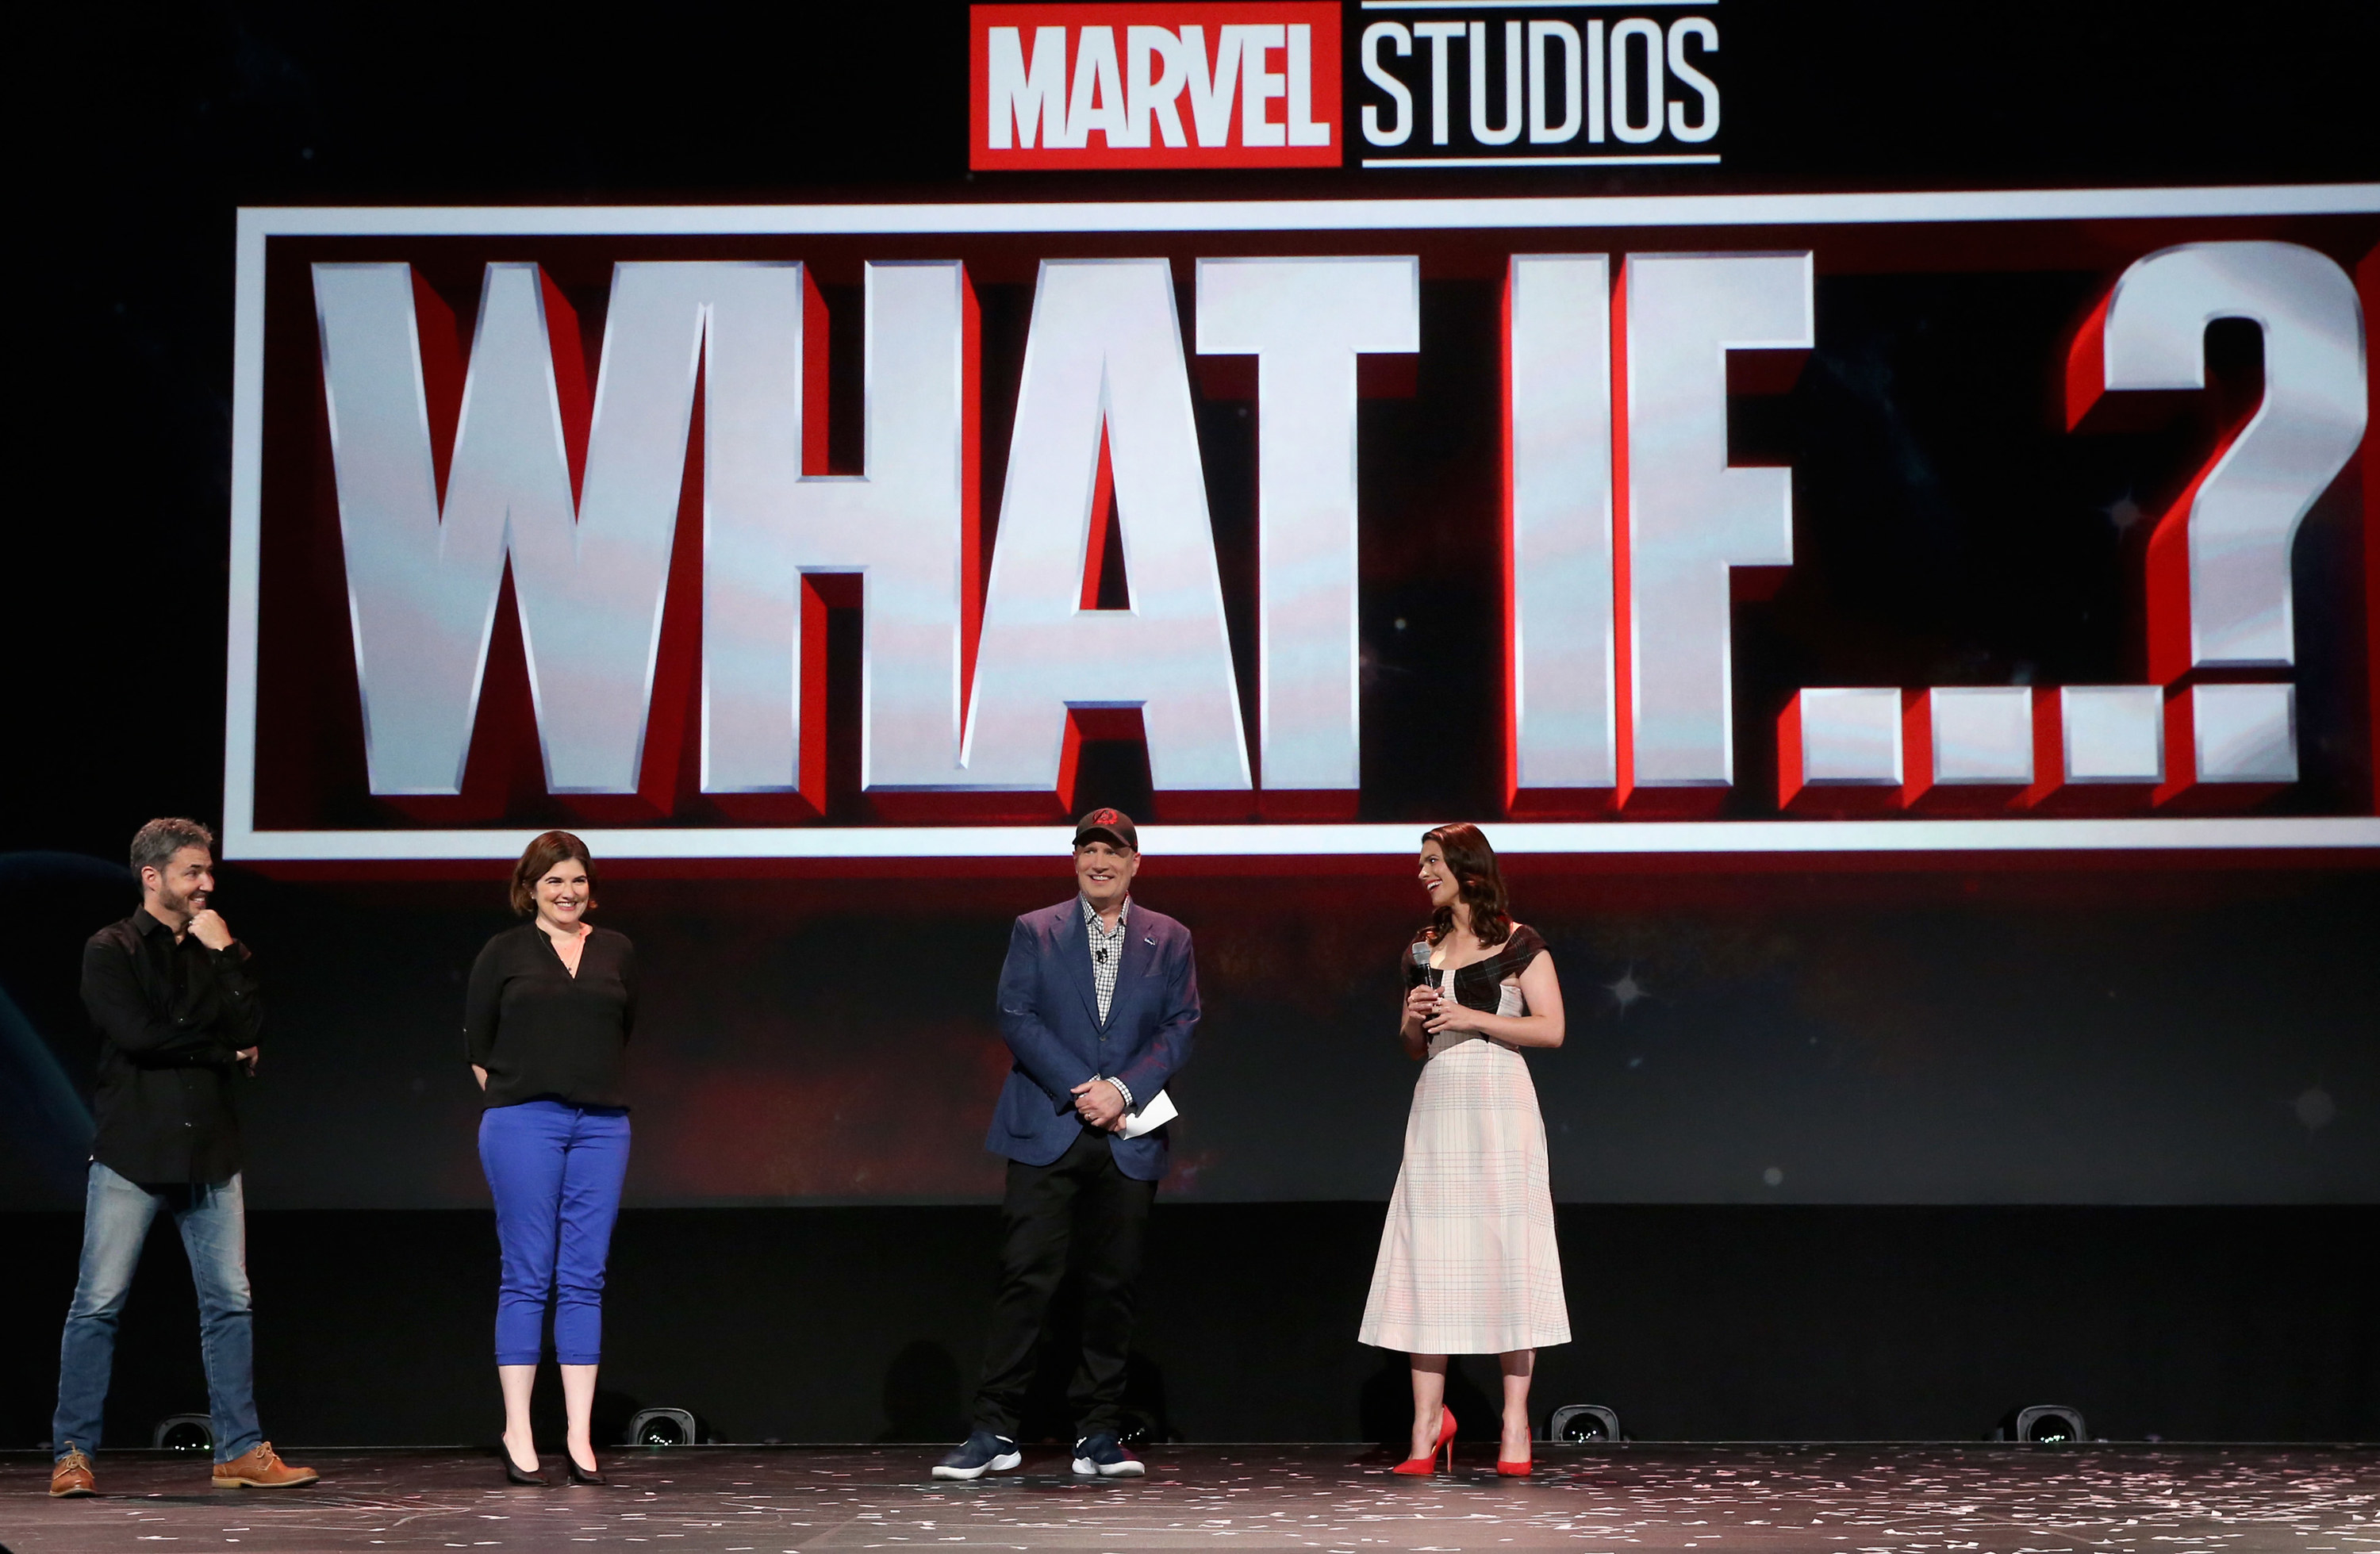 Bryan Andrews, A.C. Bradley, Kevin Feige, and Hayley Atwell in the Disney+ Showcase at the D23 EXPO